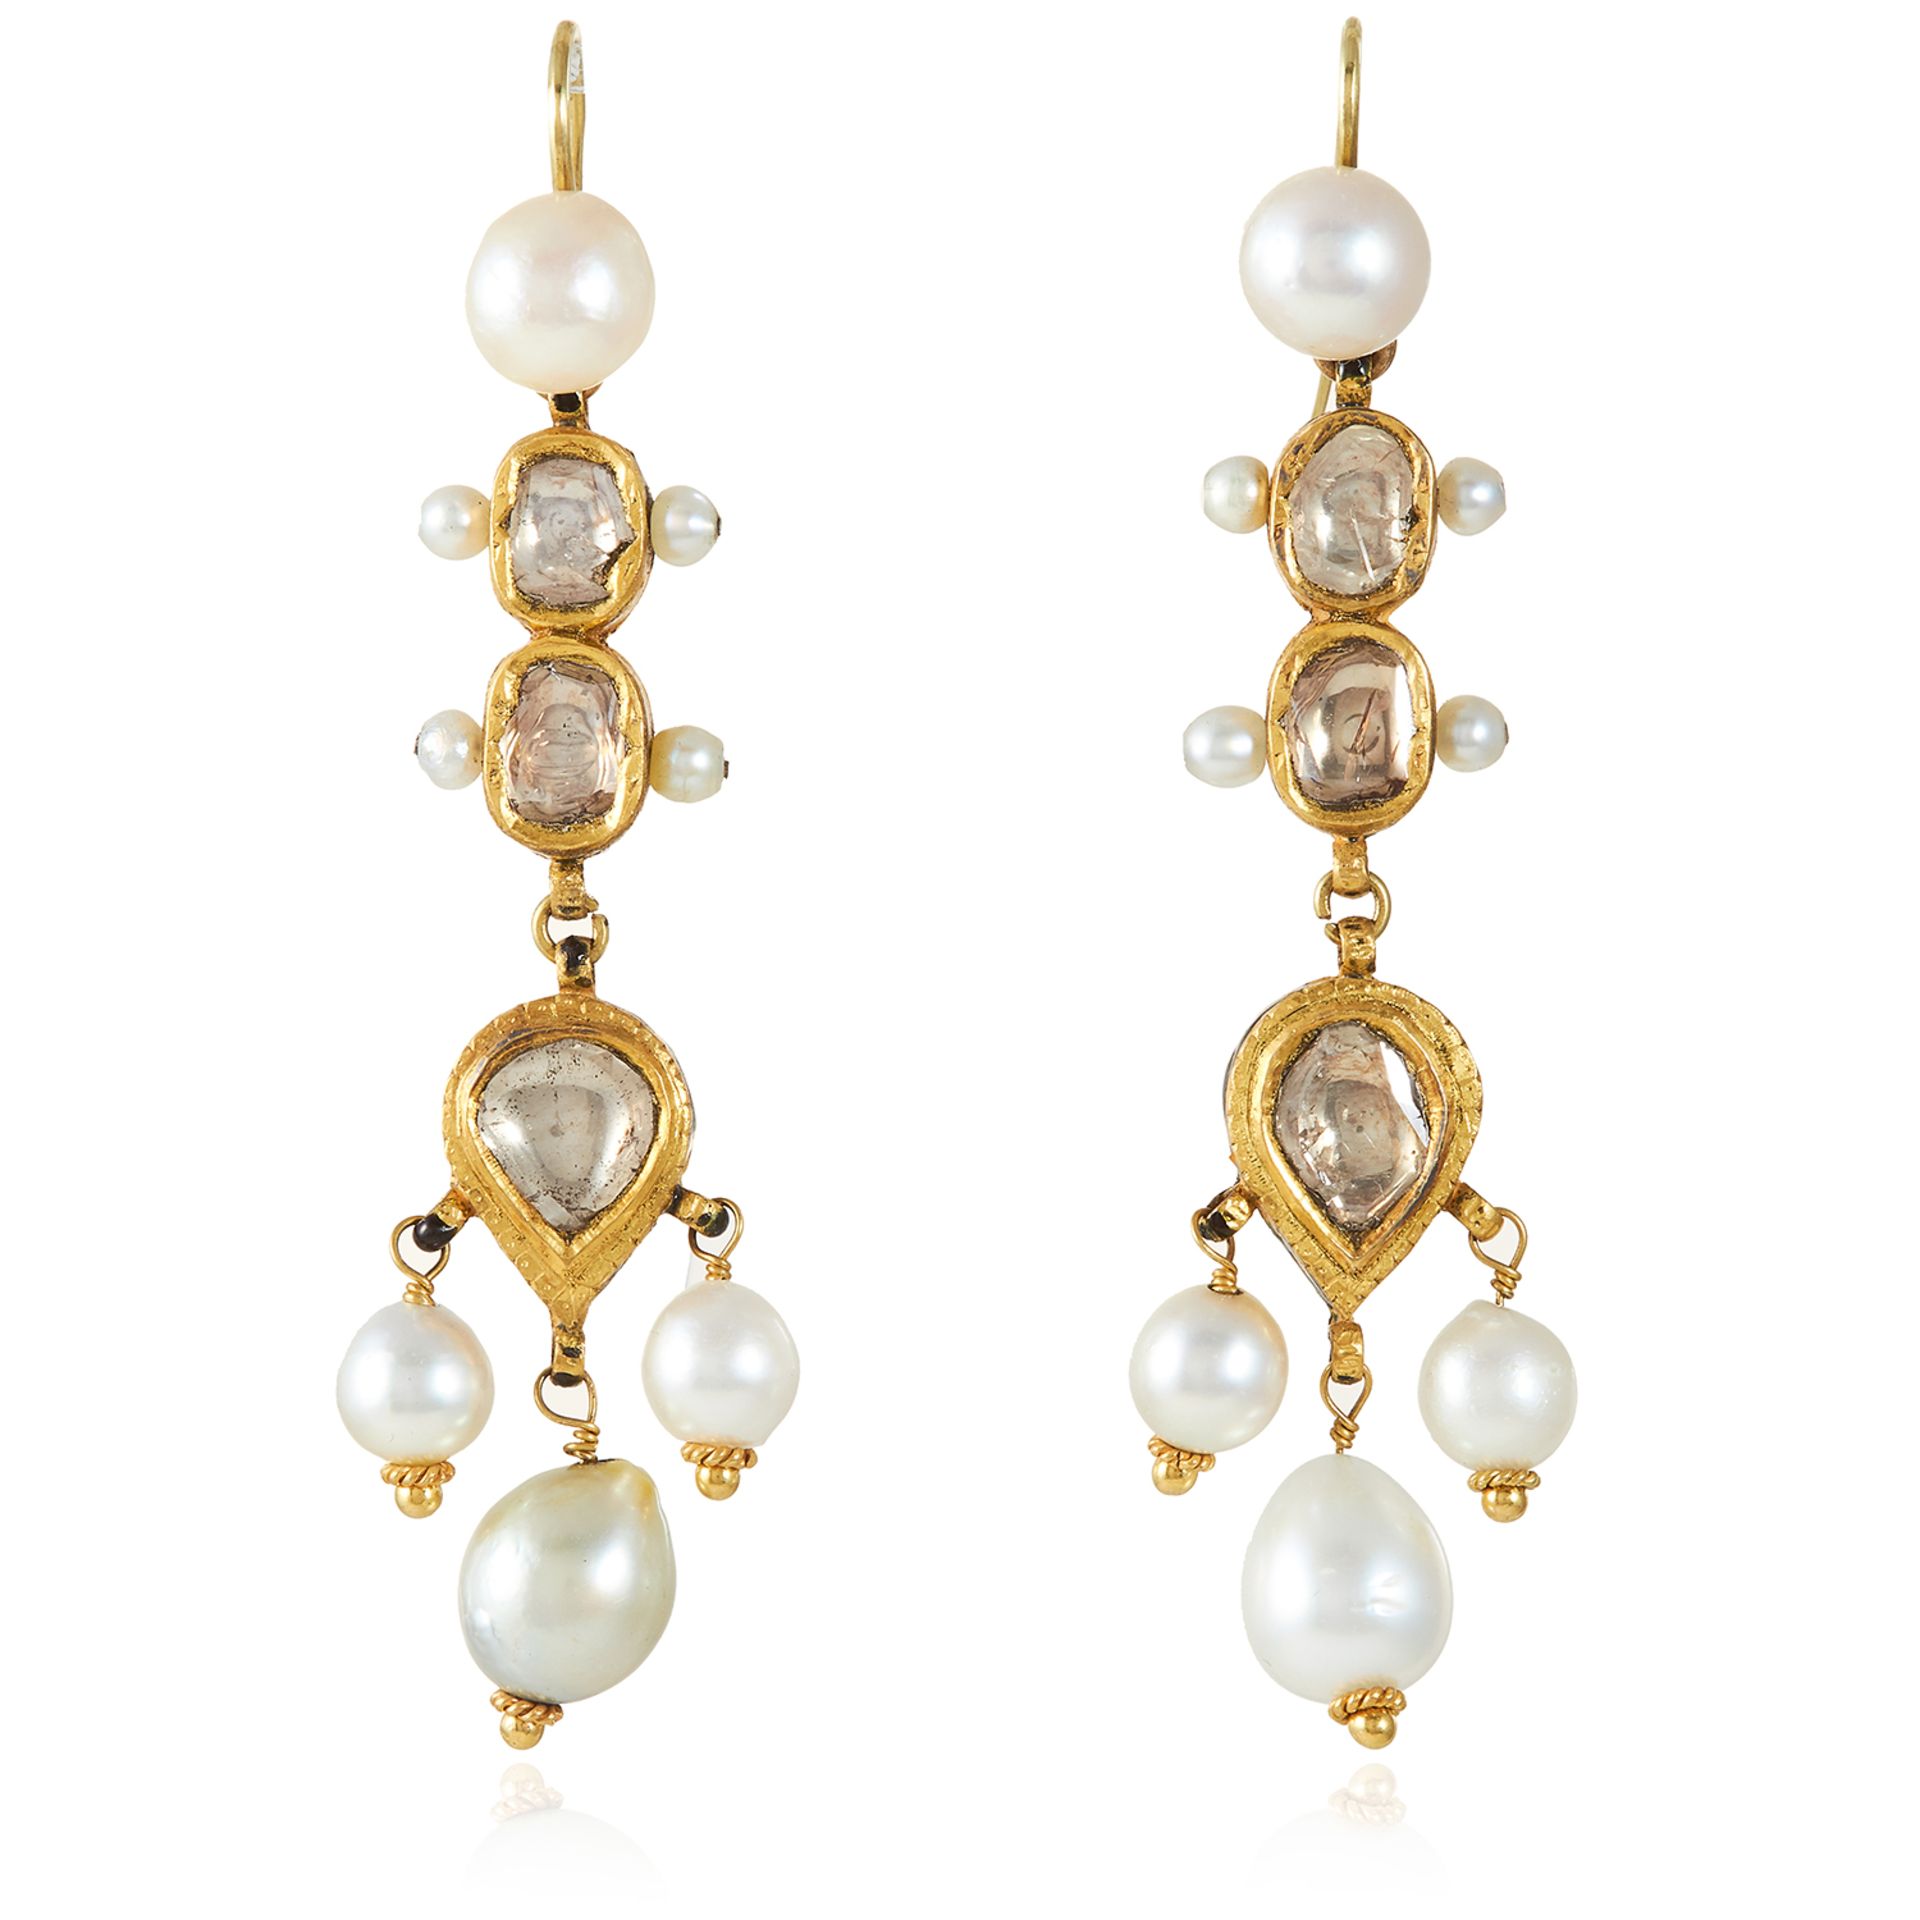 A PAIR OF DIAMOND DROP EARRINGS, INDIAN in high carat yellow gold, the articulated bodies jewelled